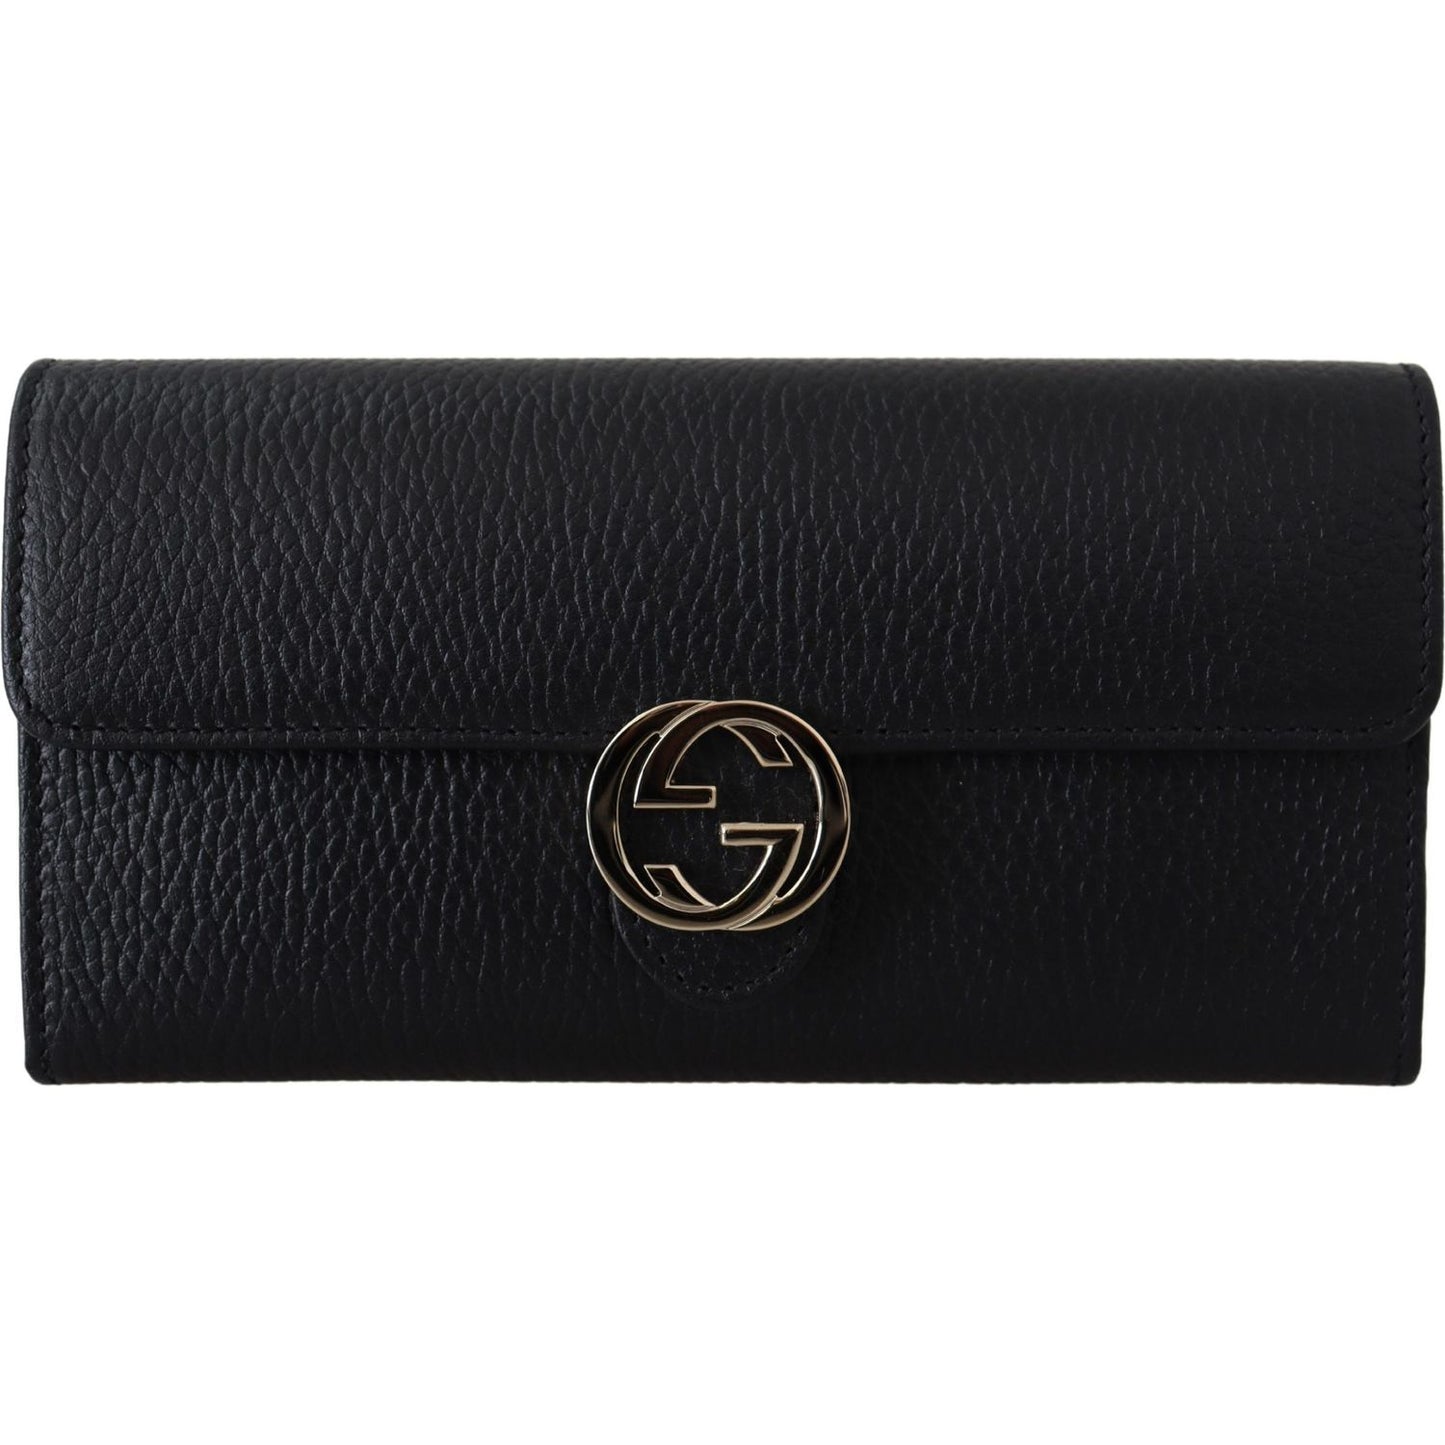 Gucci Elegant Black Leather Wallet with GG Snap Closure black-icon-leather-wallet